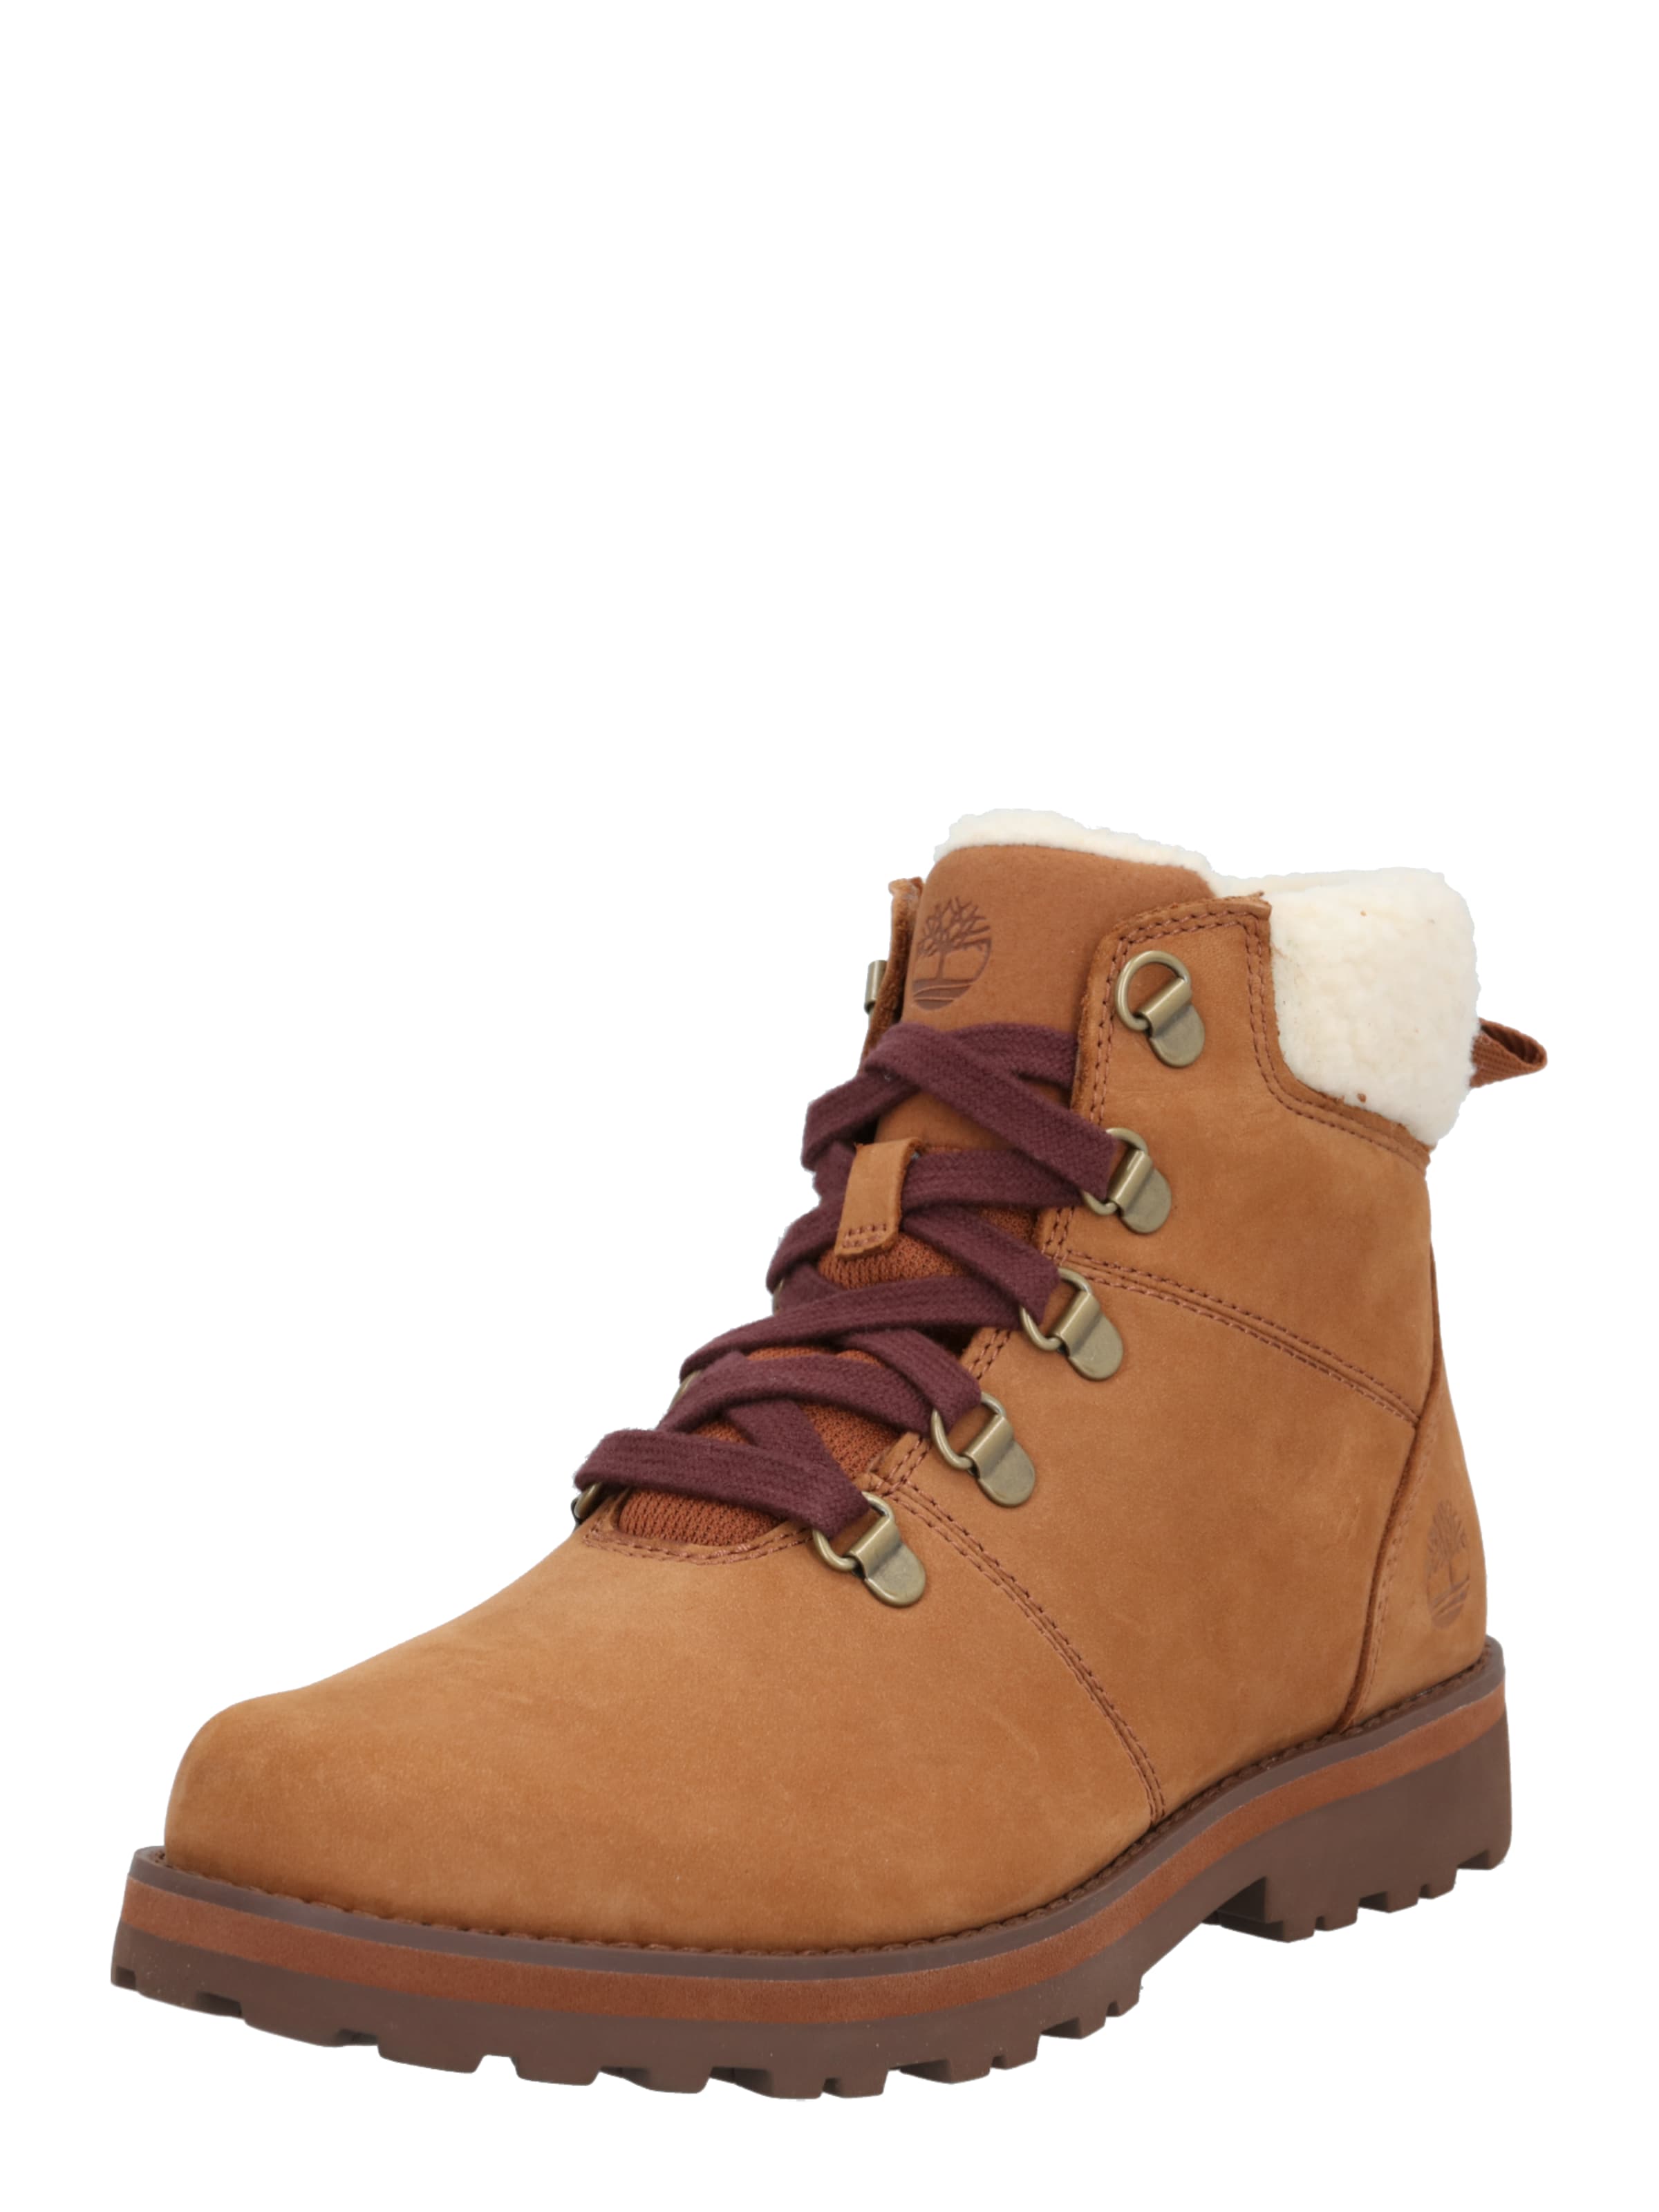 timberlands as snow boots